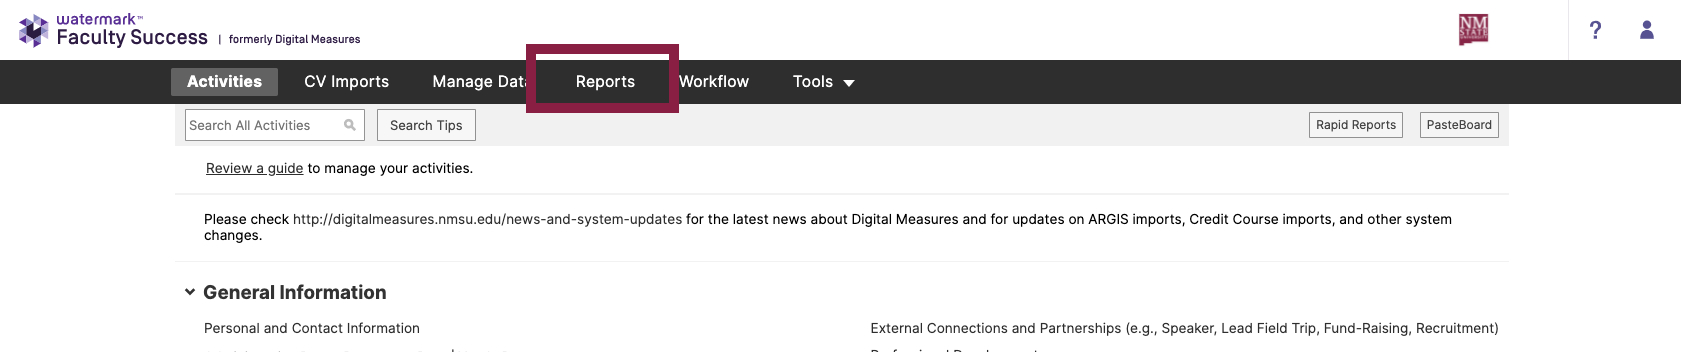 Screenshot of Watermark Faculty Success that hightlights the "Reports" option in the top navigation.